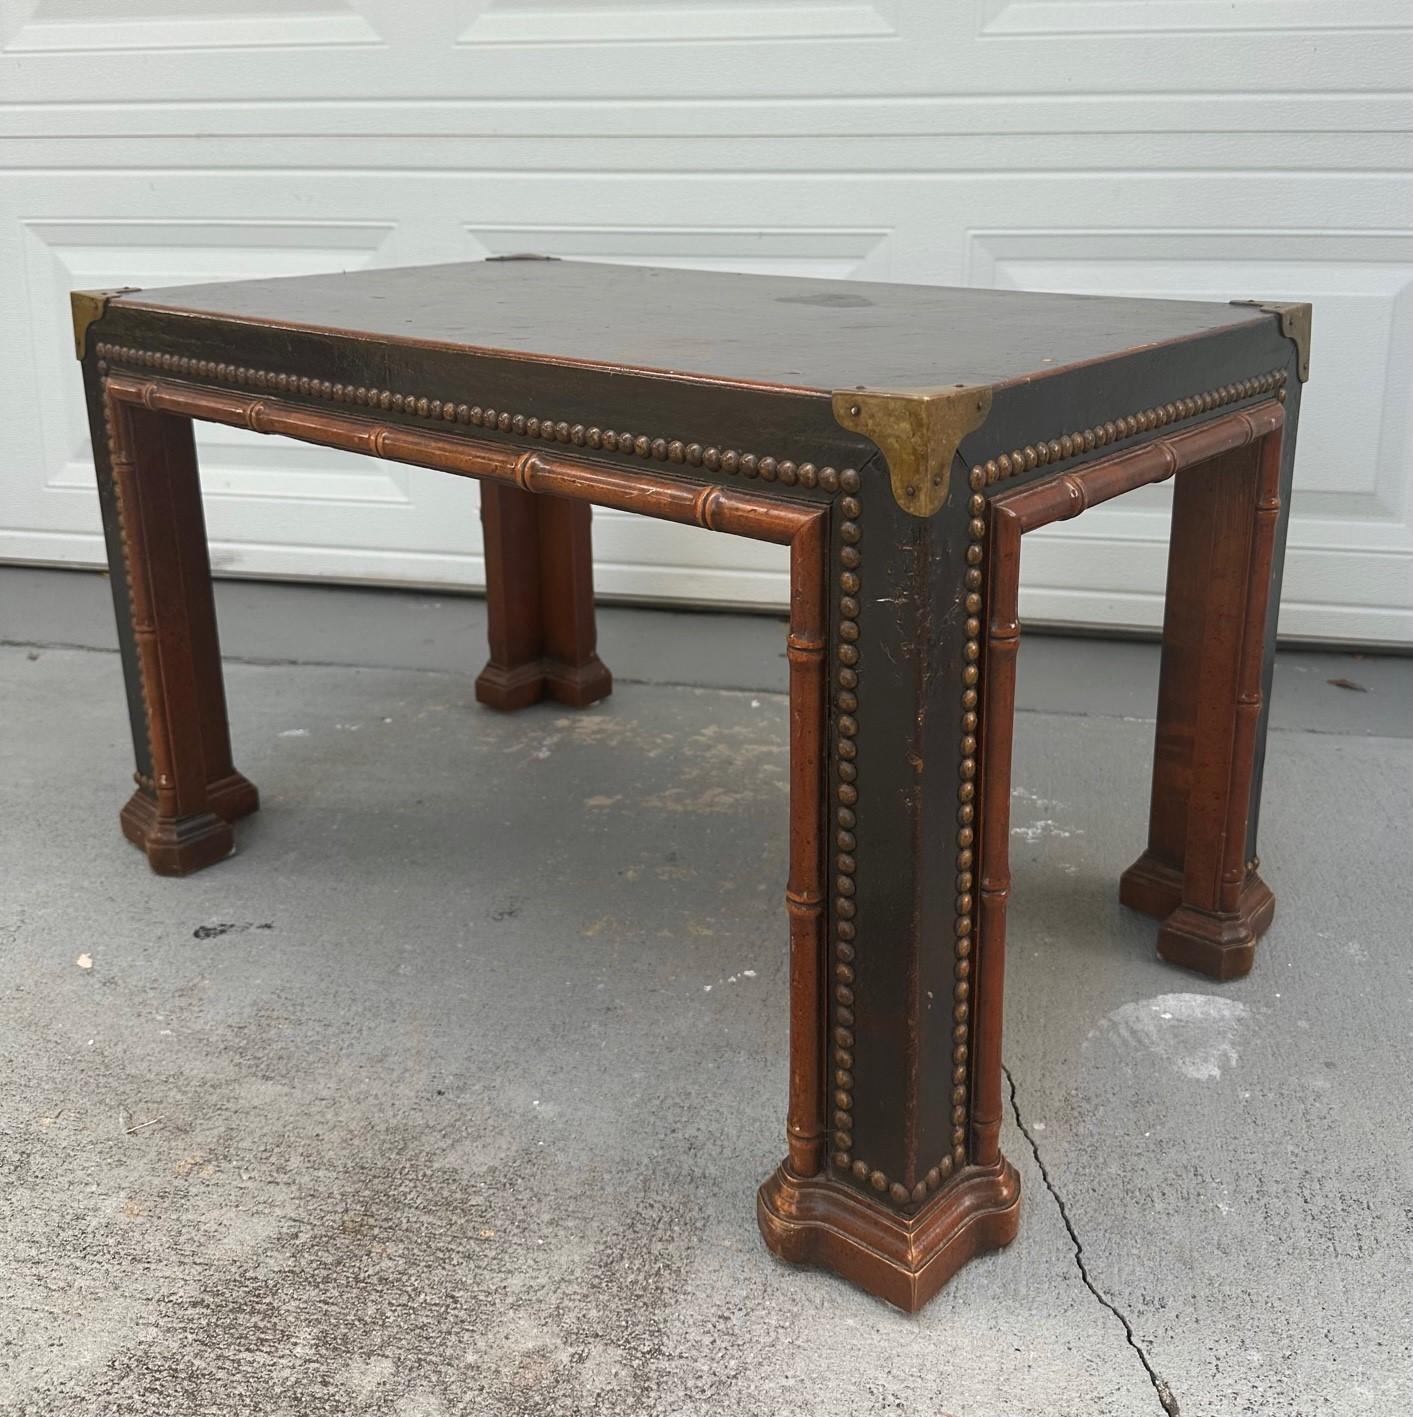 Modern 1960s Drexel Faux Bamboo Leather Wrapped Parsons Table For Sale